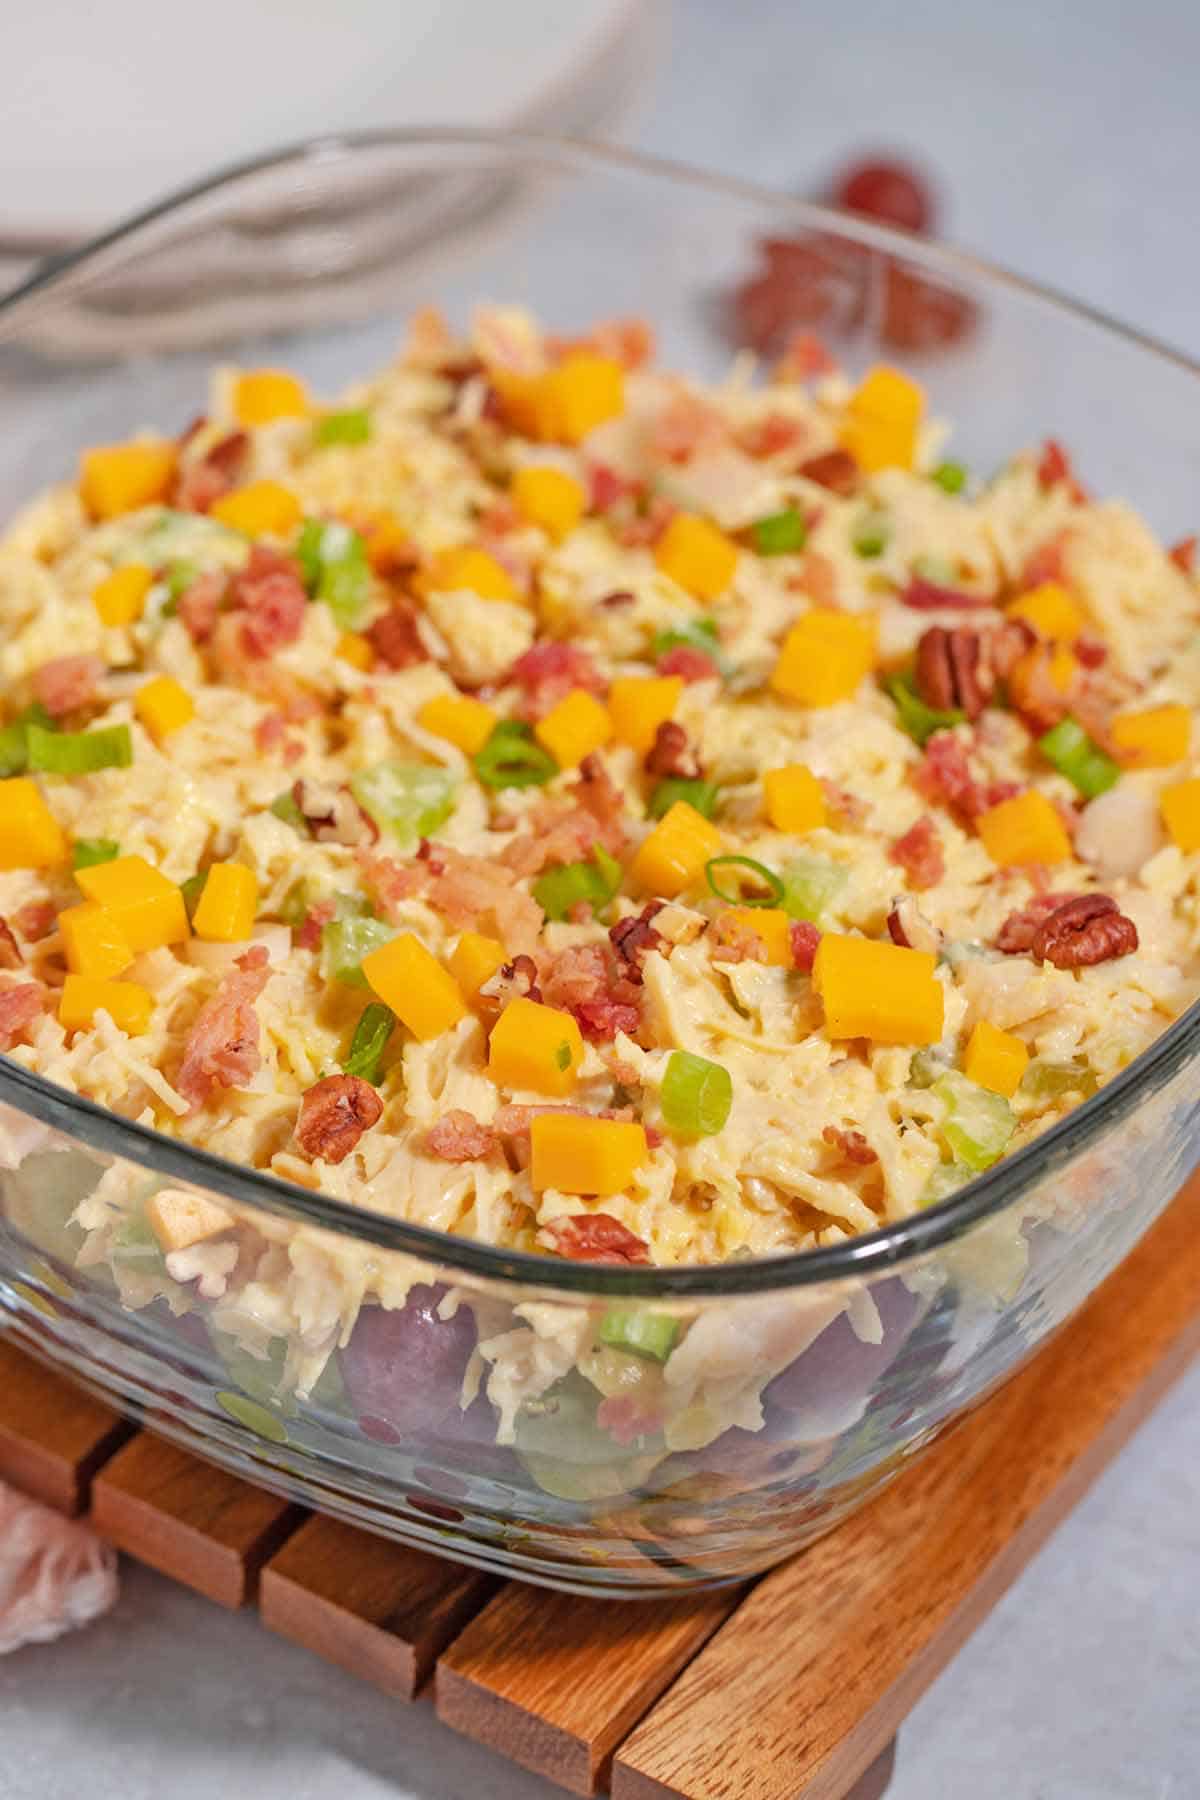 A serving bowl of 7-layer chicken salad. The layers from bottom to top are shredded lettuce, red and green grapes, chicken salad, green onions, cheddar cheese cubes, pecan pieces, and crumbled bacon.